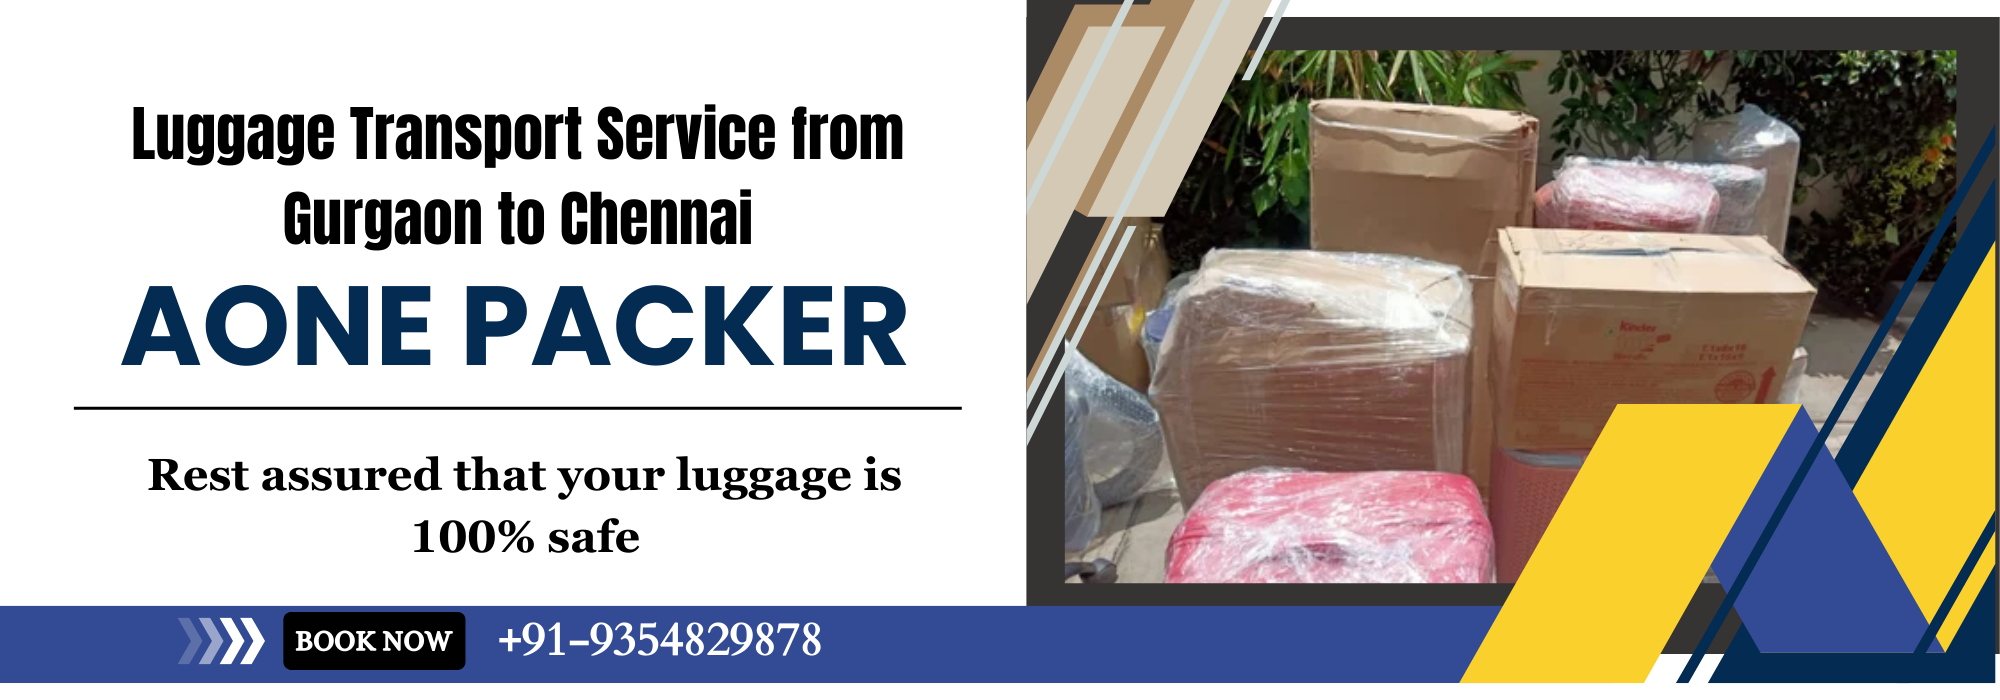 Luggage Transport Service from Gurgaon to Chennai - Best 1